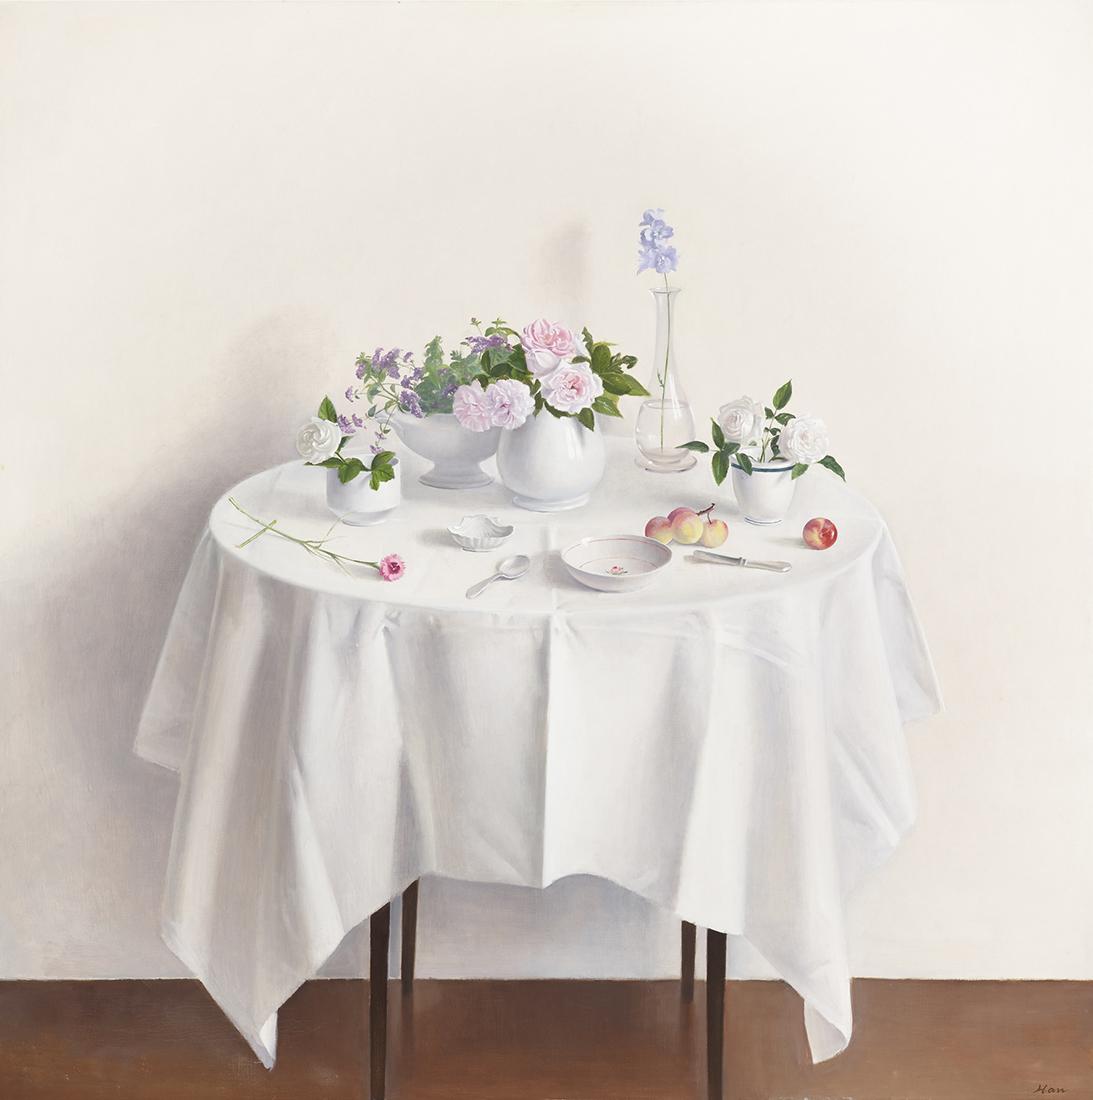 Table with flowers and white table cloth on white background